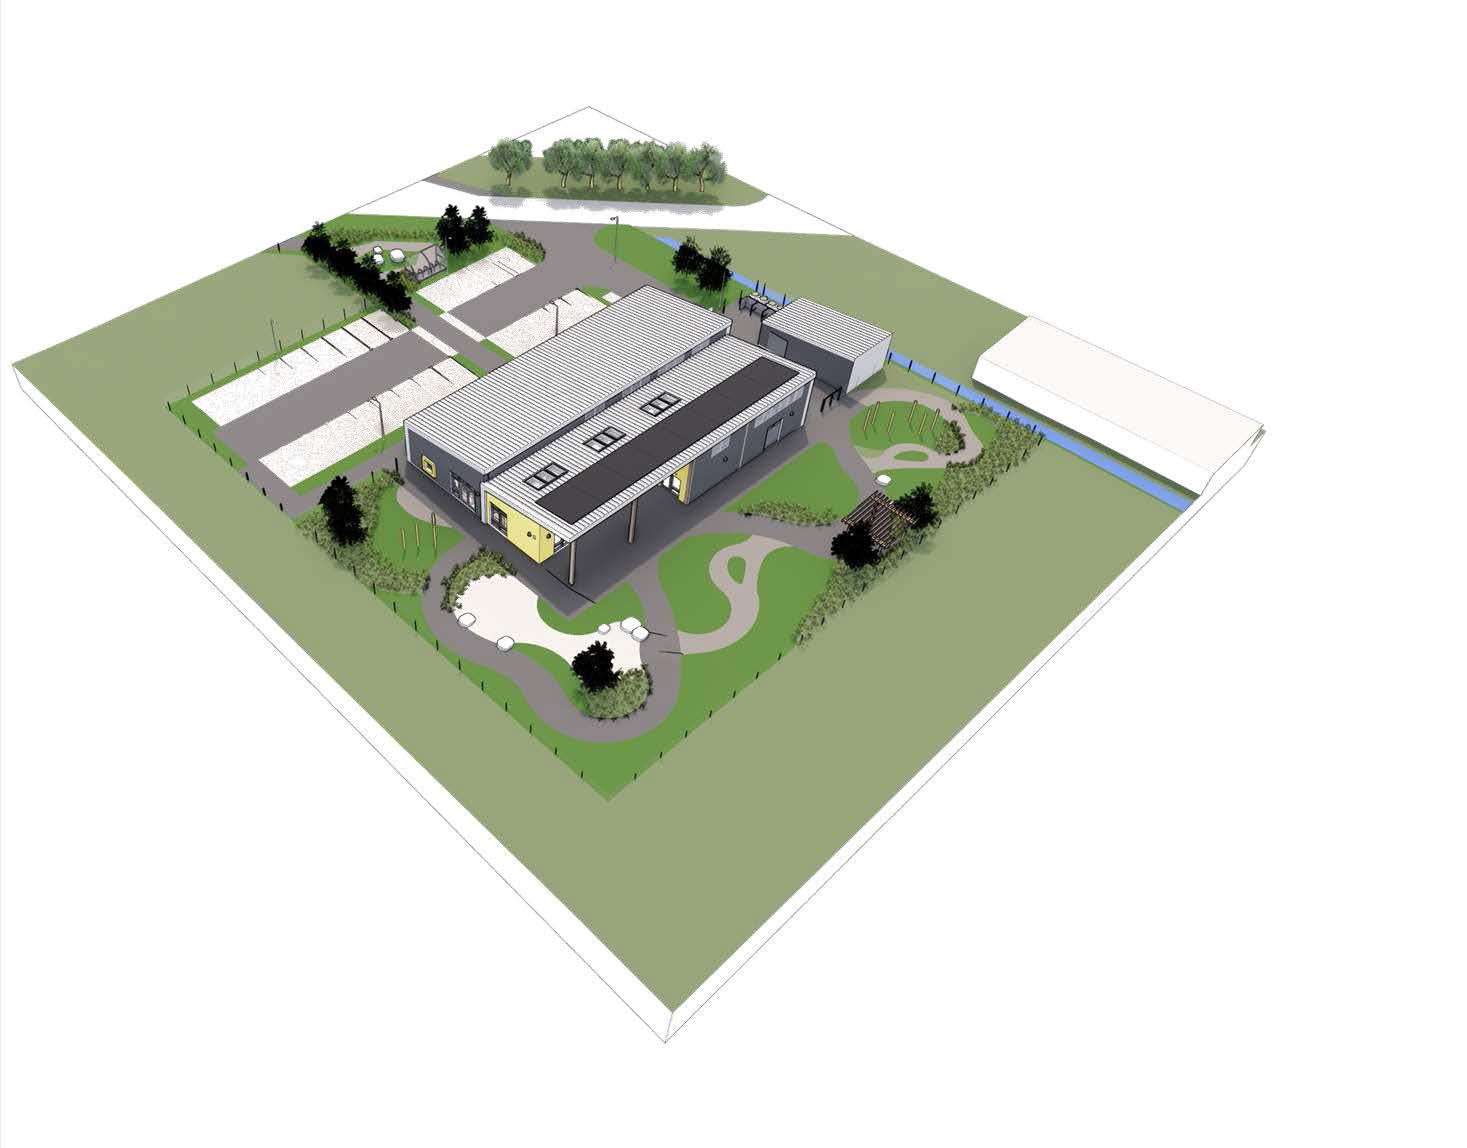 Architectural images show how the new Insch Nursery site would look.